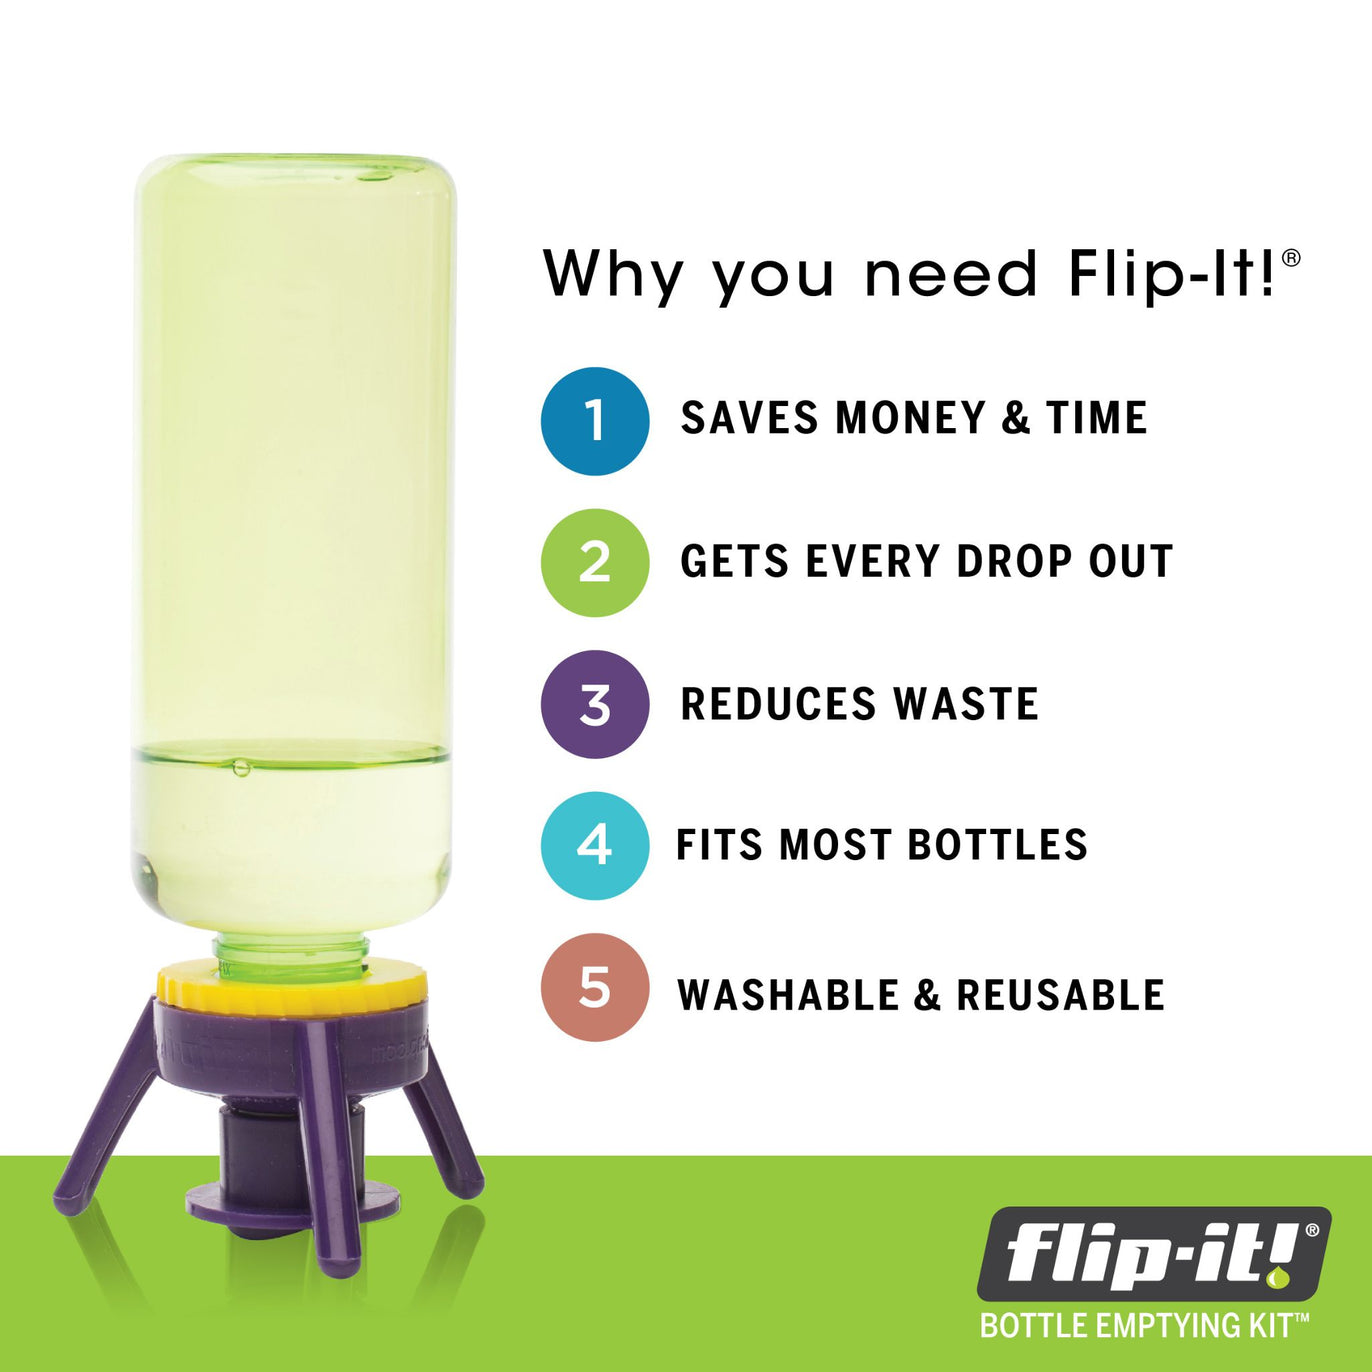 6 original systems plus 2 NEW bottle stands in one assortment! *Every Size & Style We Offer!* FREE set of 2 Nivea/Eucerin adapters with the purchase of our Flip-It! Super Set! - ONLY AVAILABLE at flipitcap.com | Free Adapters Not on Amazon